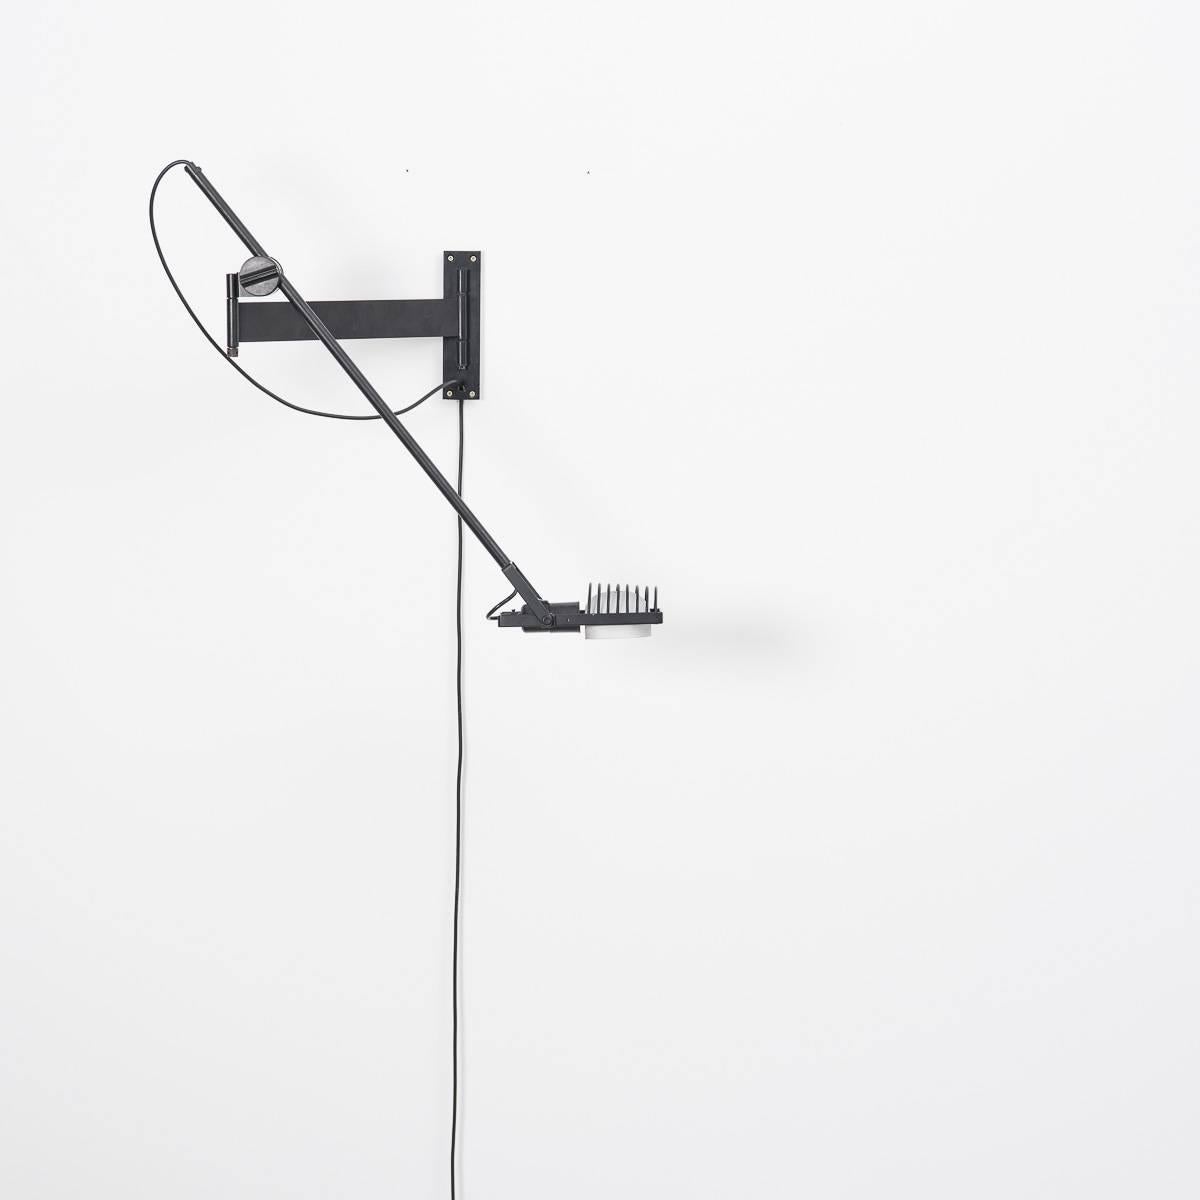 Ernesto Gismondi Sintesi wall lamp.
Artemide, Italy 1976.

An extremely rare architectural wall lamp from the Sintesi range designed by Ernesto Gismondi in 1976. High quality production constructed from coated steel and aluminium.

Gismondi founded